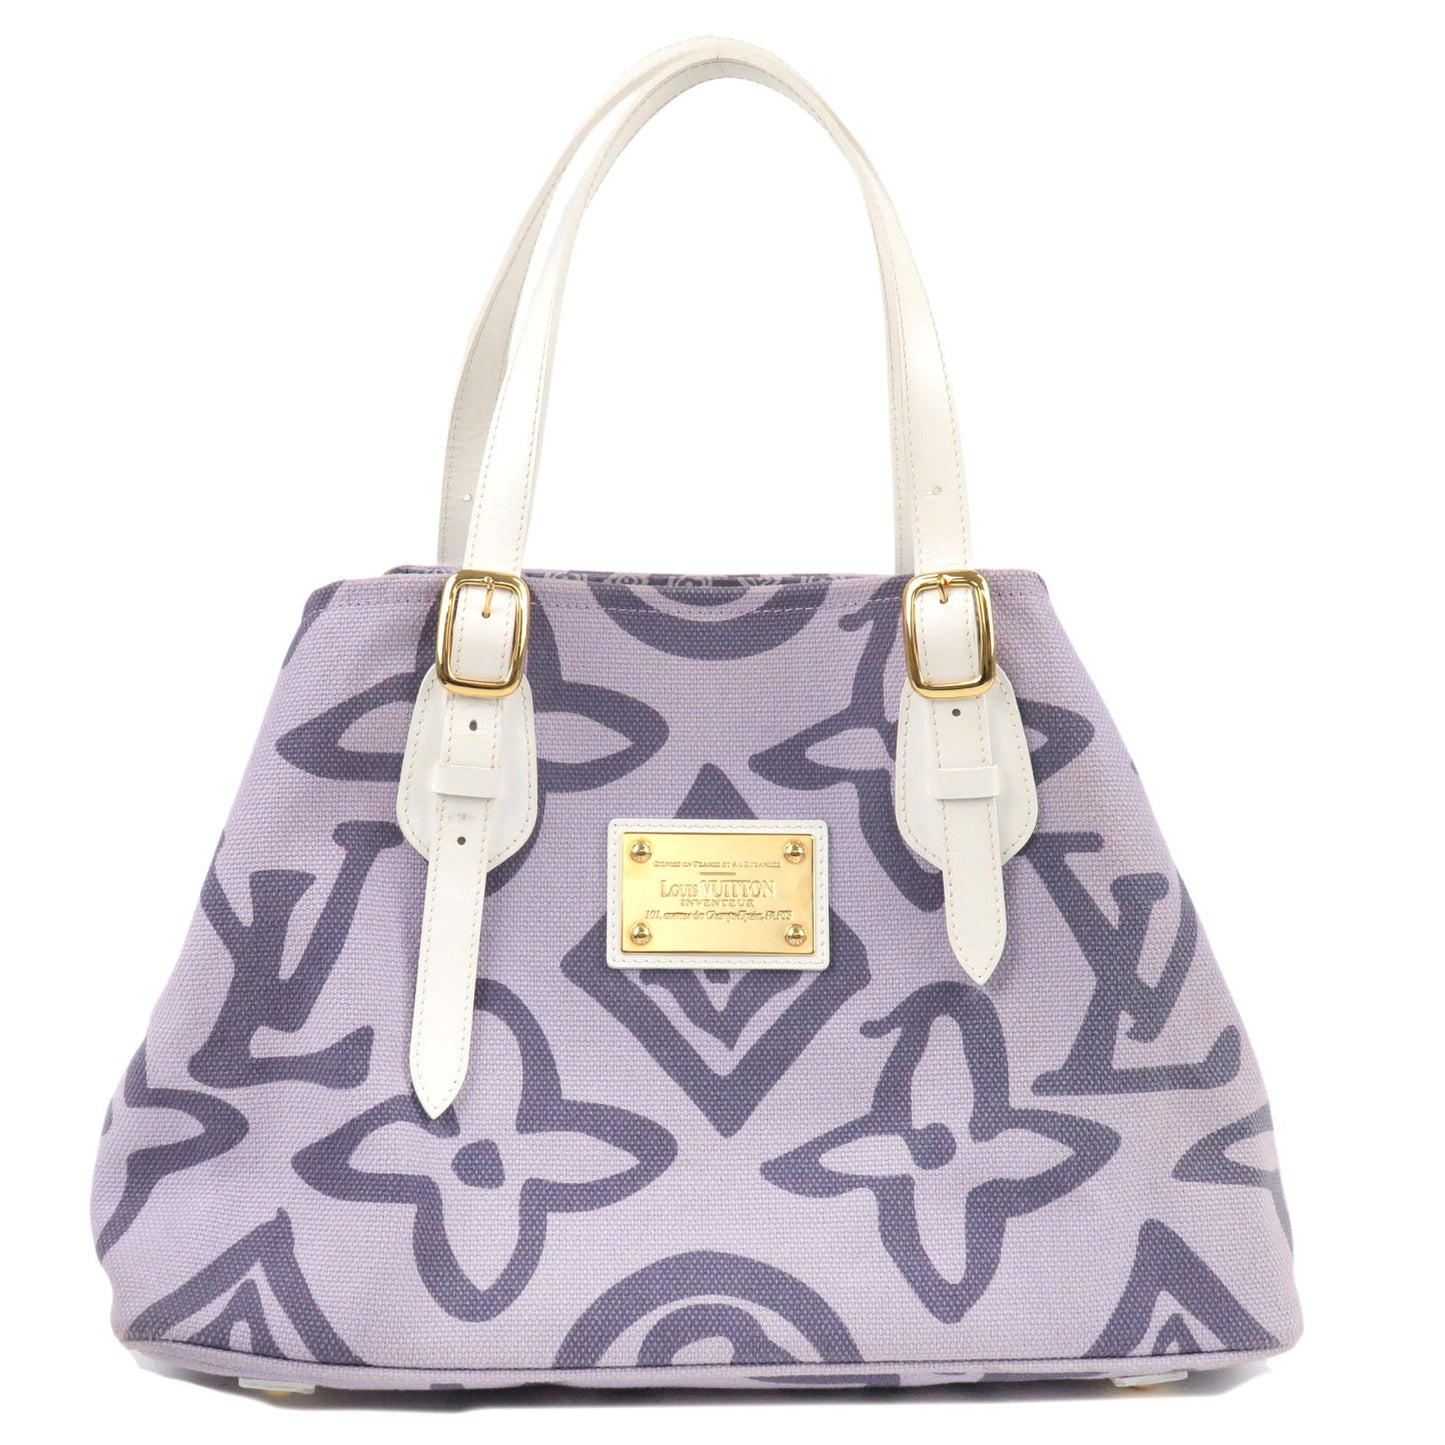 Louis-Vuitton-Cruise-Line-Tahitienne-PM-Tote-Bag-M95680